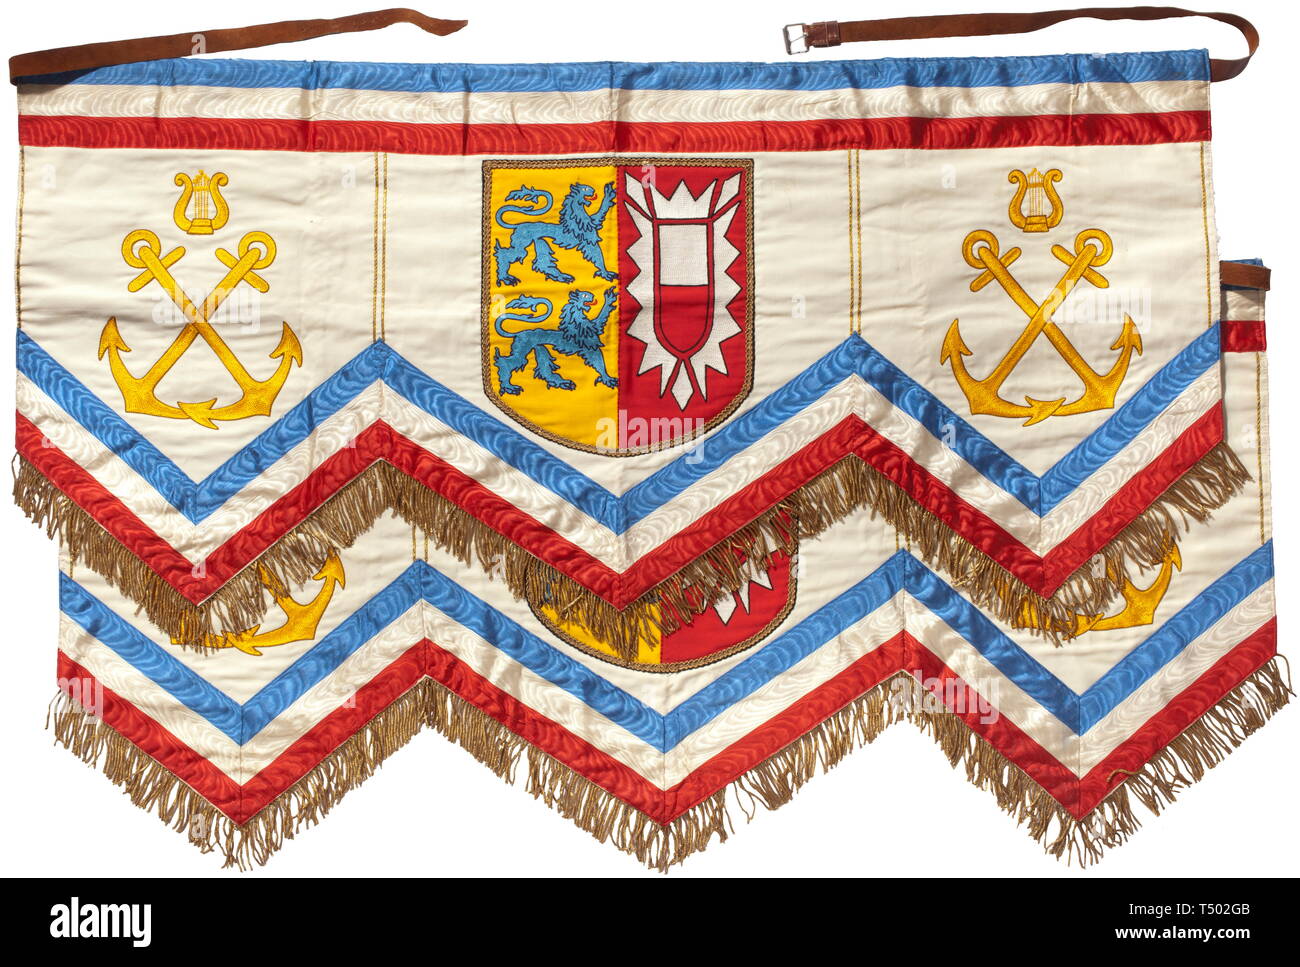 Two kettledrum hangings - line battleship Schleswig-Holstein. Fine cotton cloth rendered in multiple colours with trim in the state colours of Schleswig-Holstein and gold fringe, the fields with crossed anchors with lyres and the coat of arms of the state that gave its name to the ship, leather strapping. The reverse of each labelled with the flag factory tag of 'M. Fleck, Hamburg'. Cloth dimensions ca. 110 x 55 cm. Extremely rare kettledrum hangings. On 1 September 1939 the ship participated in the attack against the fortified Westerplatte position near Danzig. According t, Editorial-Use-Only Stock Photo